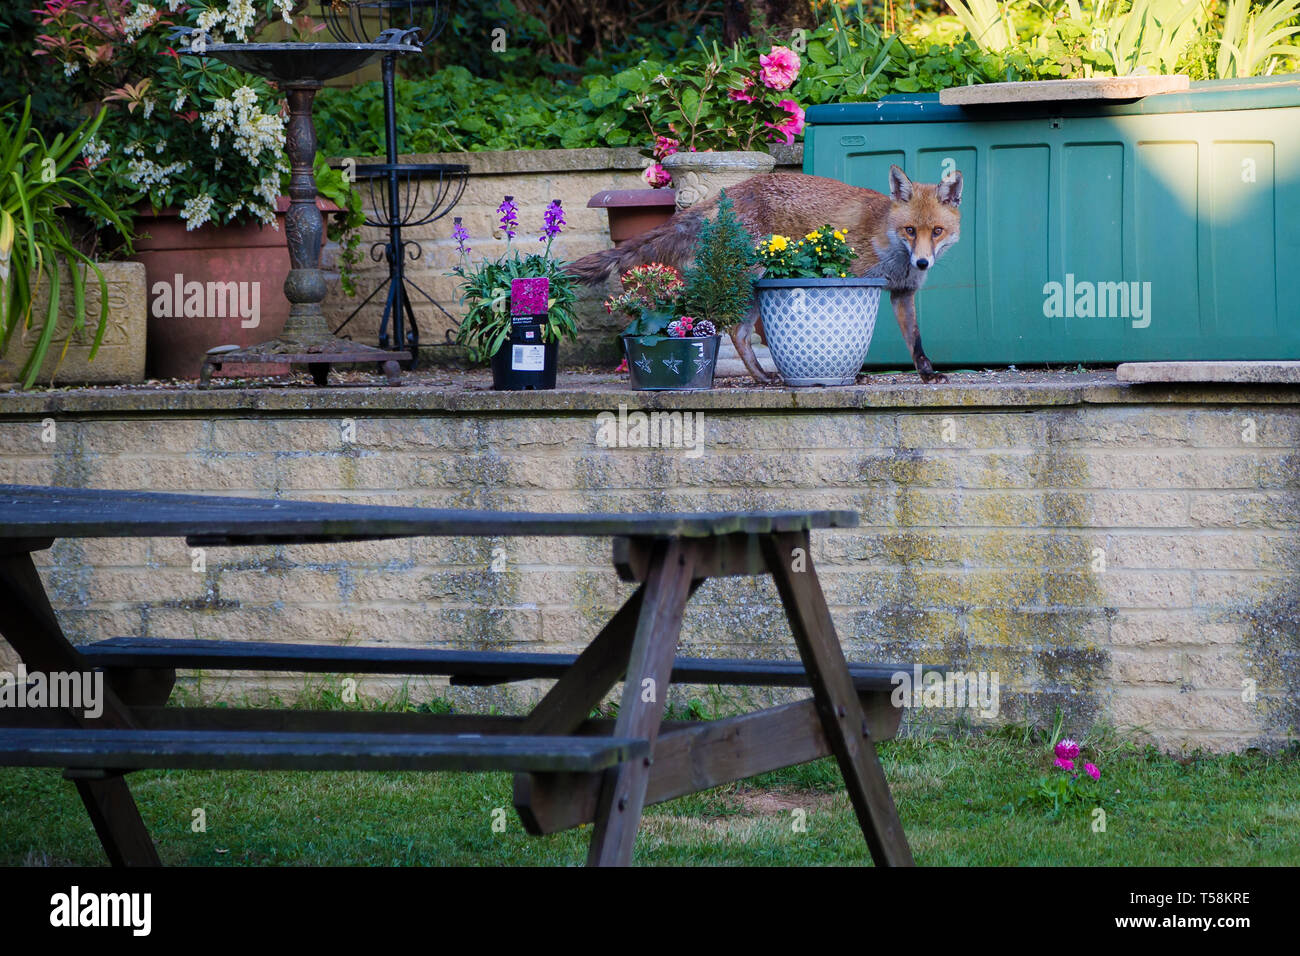 Gravesend Kent, UK. A Fox in an English garden looking for food. Stock Photo